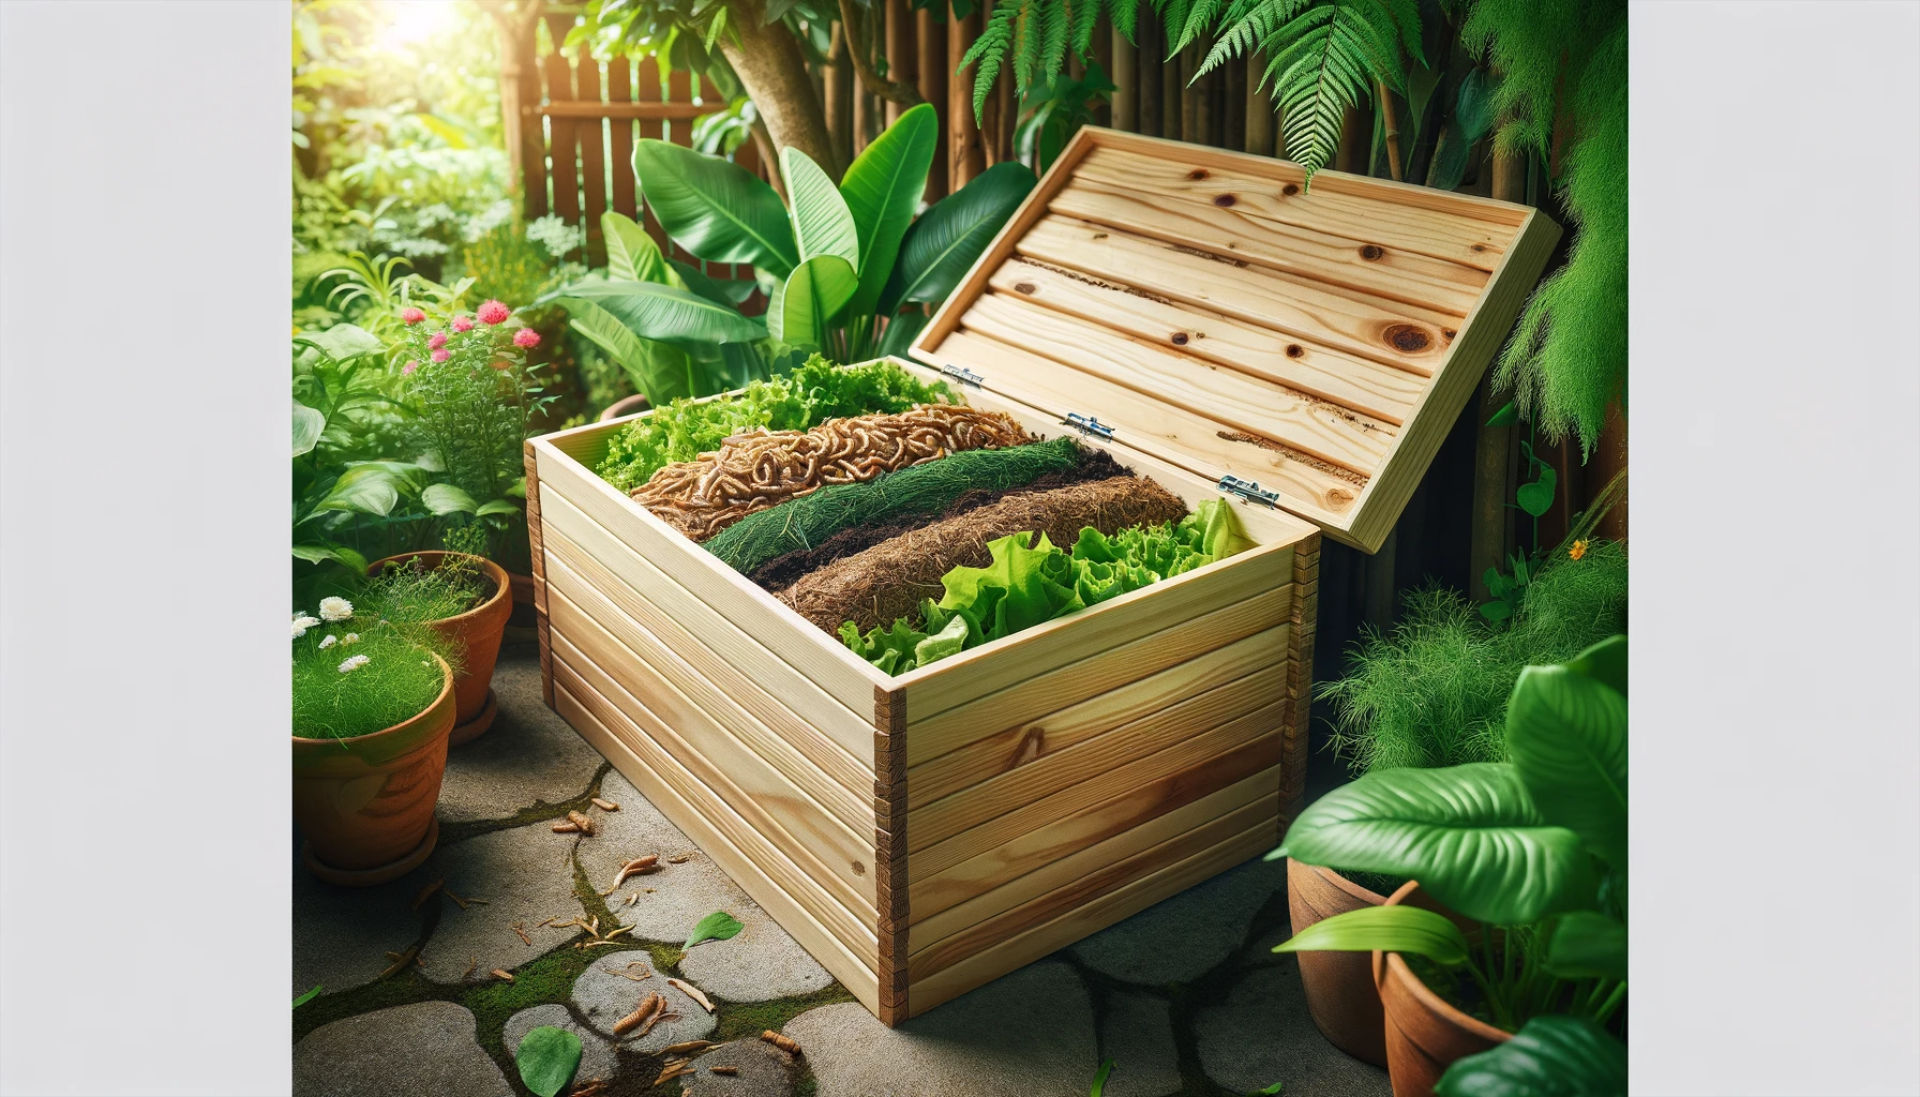 Setting Up Your Vermicomposting Bin: The second image depicts a beautifully arranged vermicomposting bin set up in a garden environment, with a wooden bin partially open to reveal layers of organic material inside.